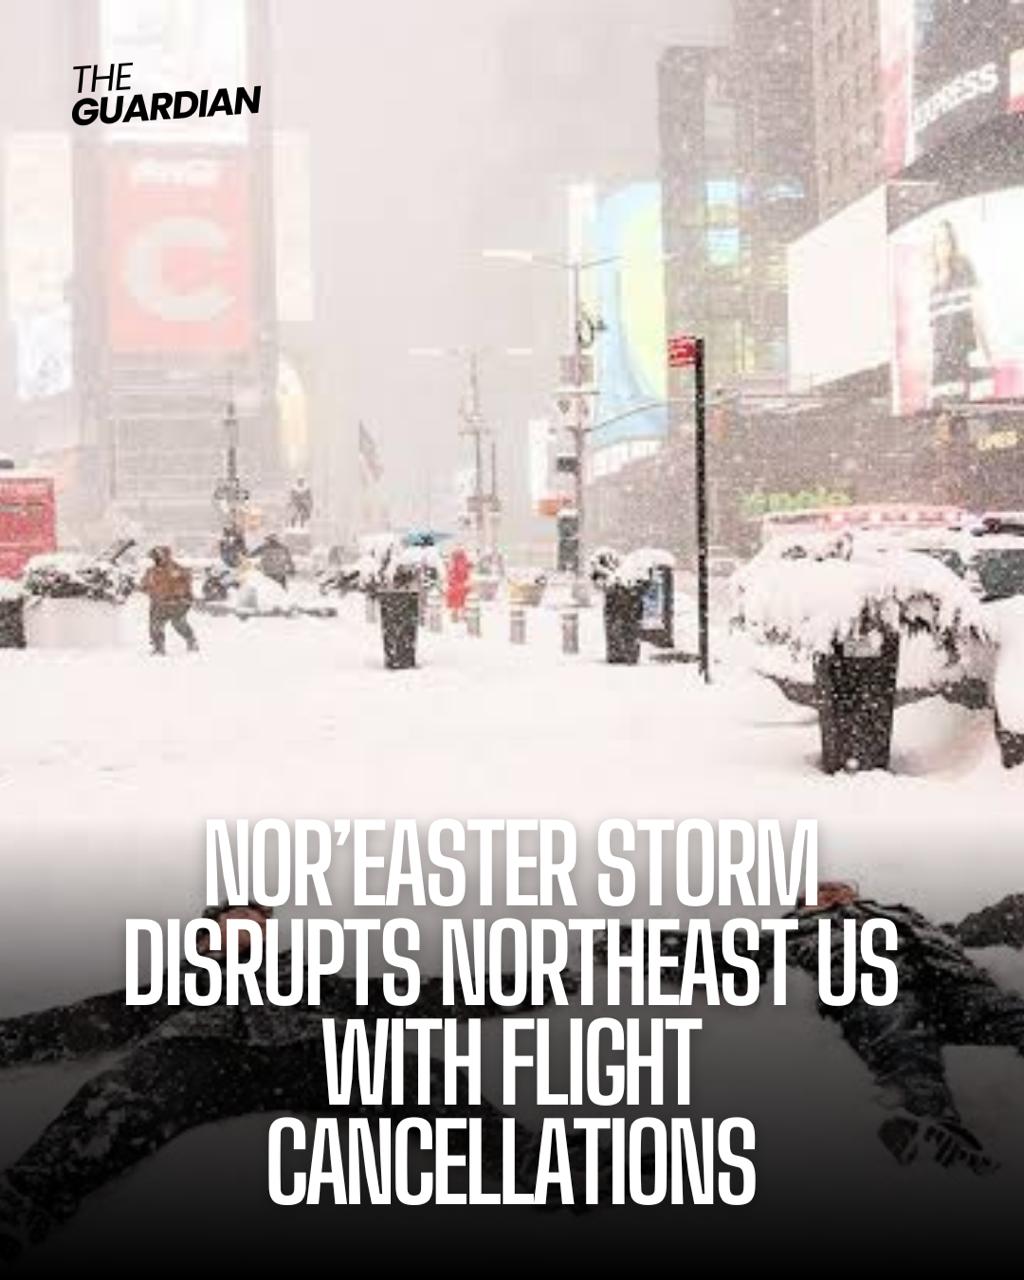 Meteorologists expected New York City could get as much as 8 inches of snow, with a foot or more likely in Boston.